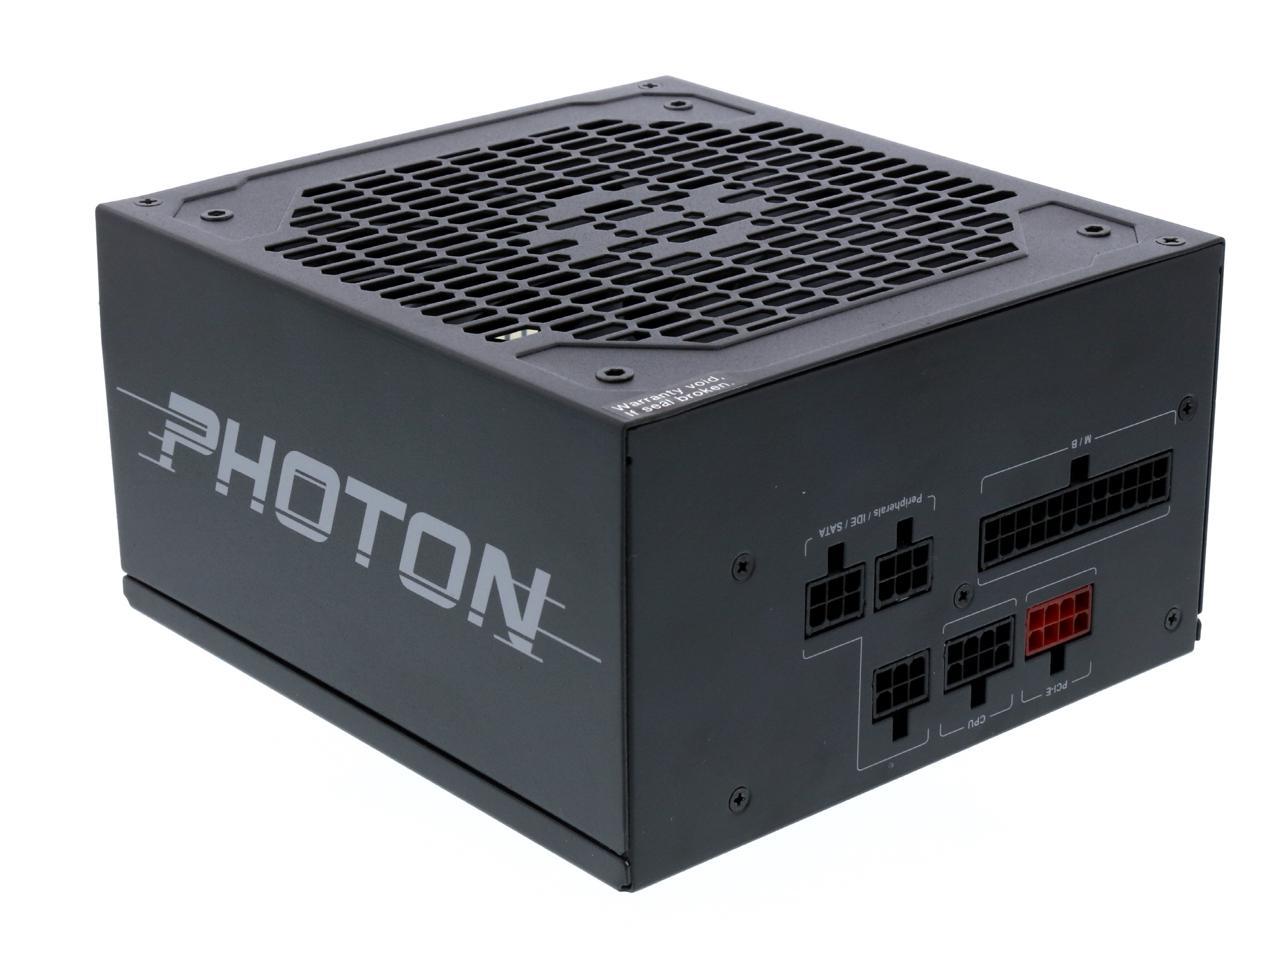 5 Year Warranty PHOTON Series Full Modular 550 Watt 80 PLUS Gold Certified PSU with Silent 135mm Fan and Auto Fan Speed Control ROSEWILL Gaming 80 Plus Gold 550W Power Supply PSU 